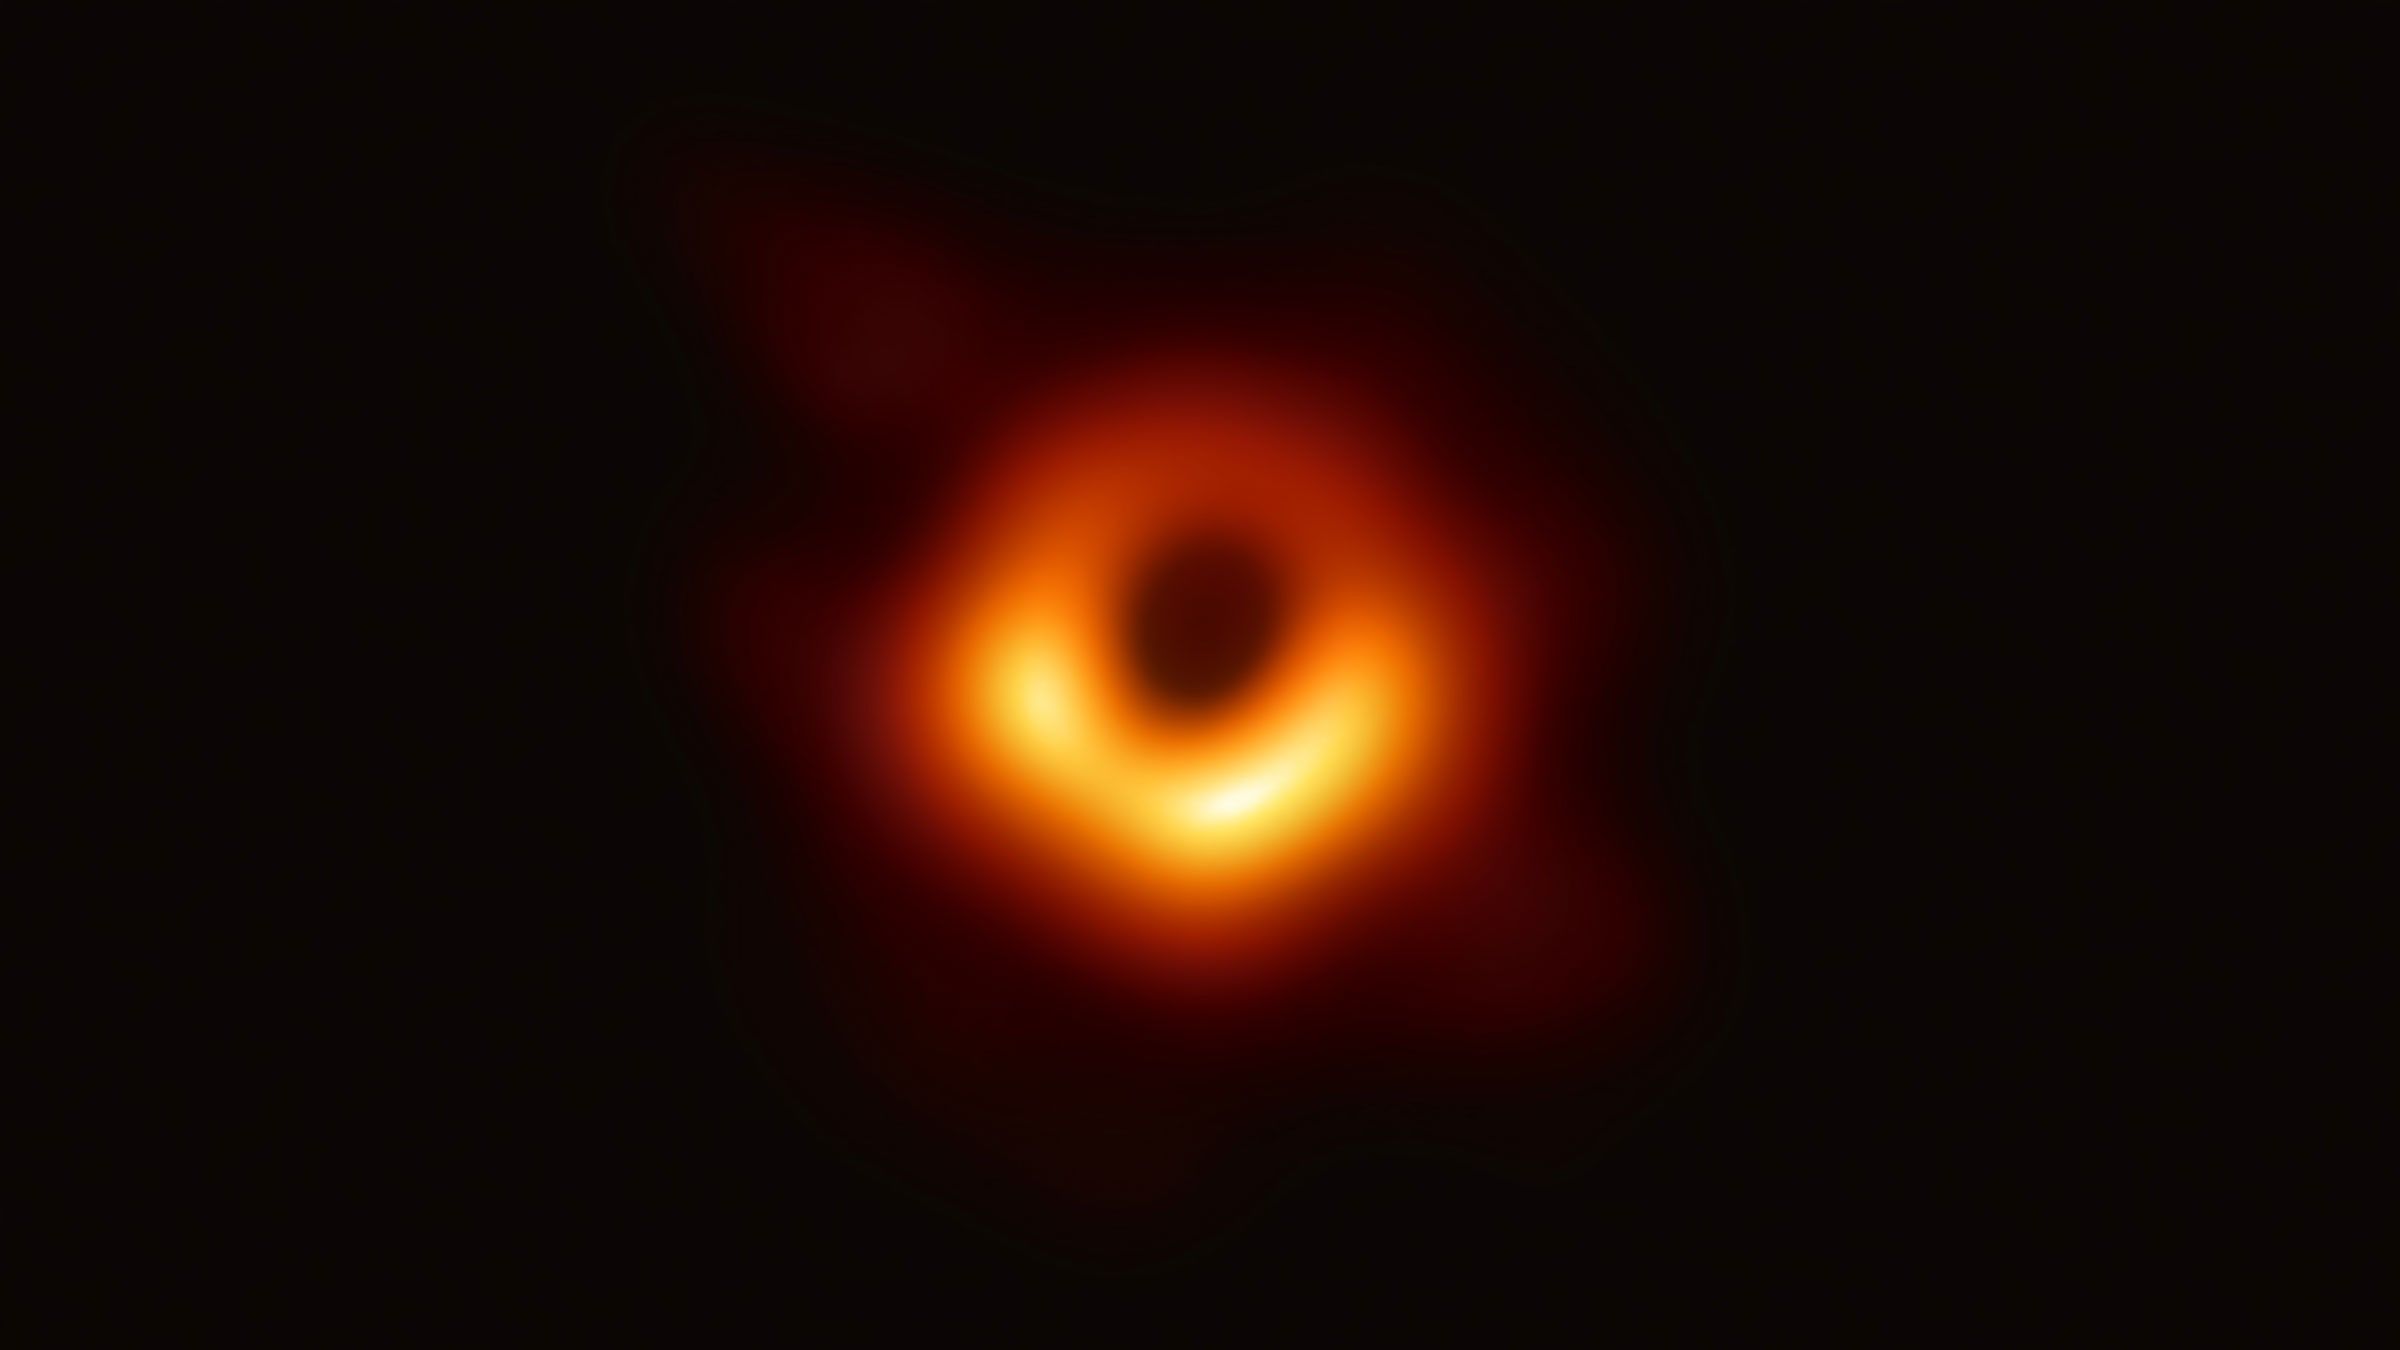 The First Black Hole Picture Has Finally Been Revealed